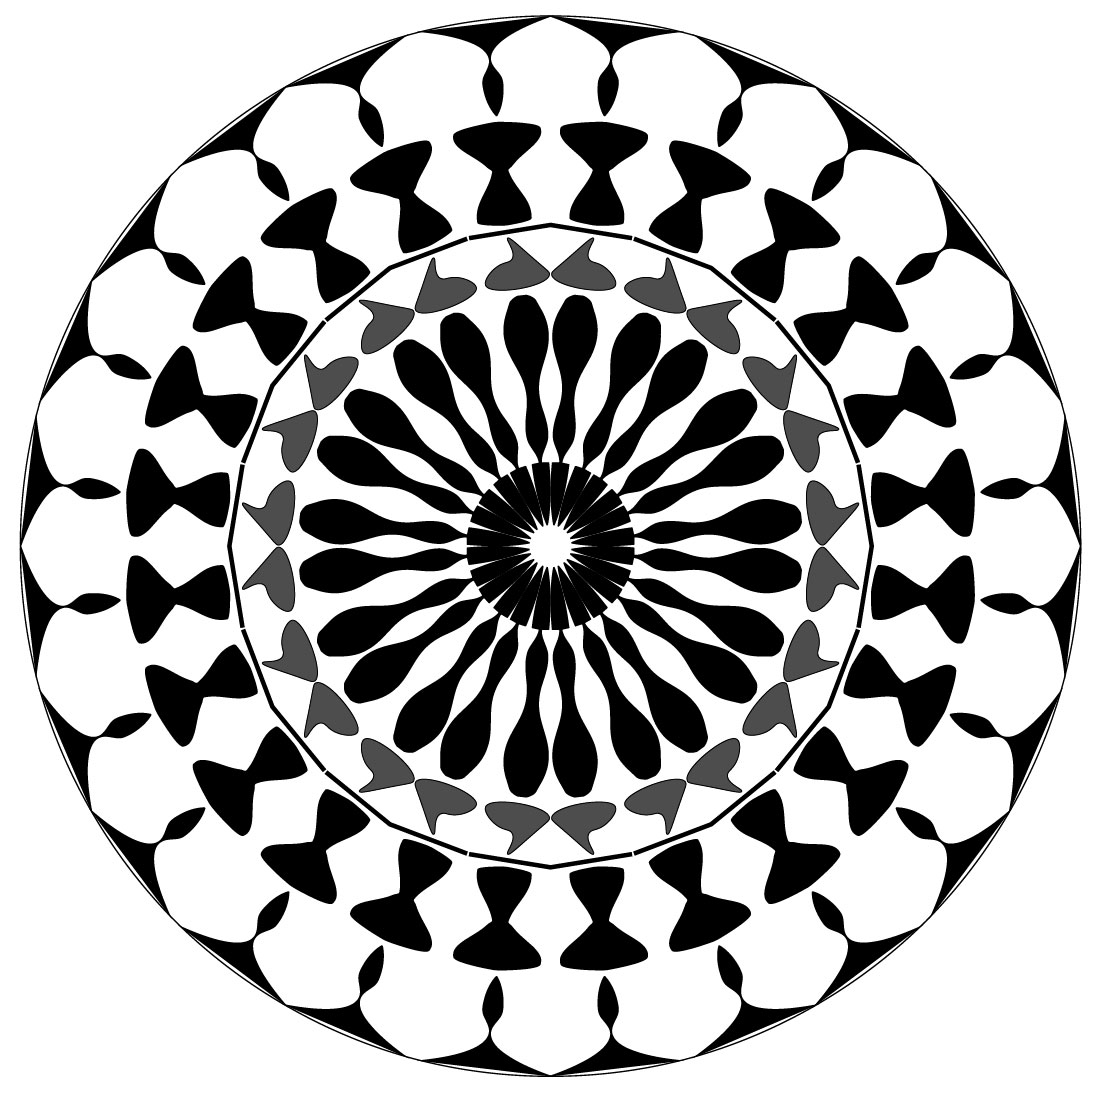 Mandala-Art-with-black-and-white-lotus-flowers cover image.